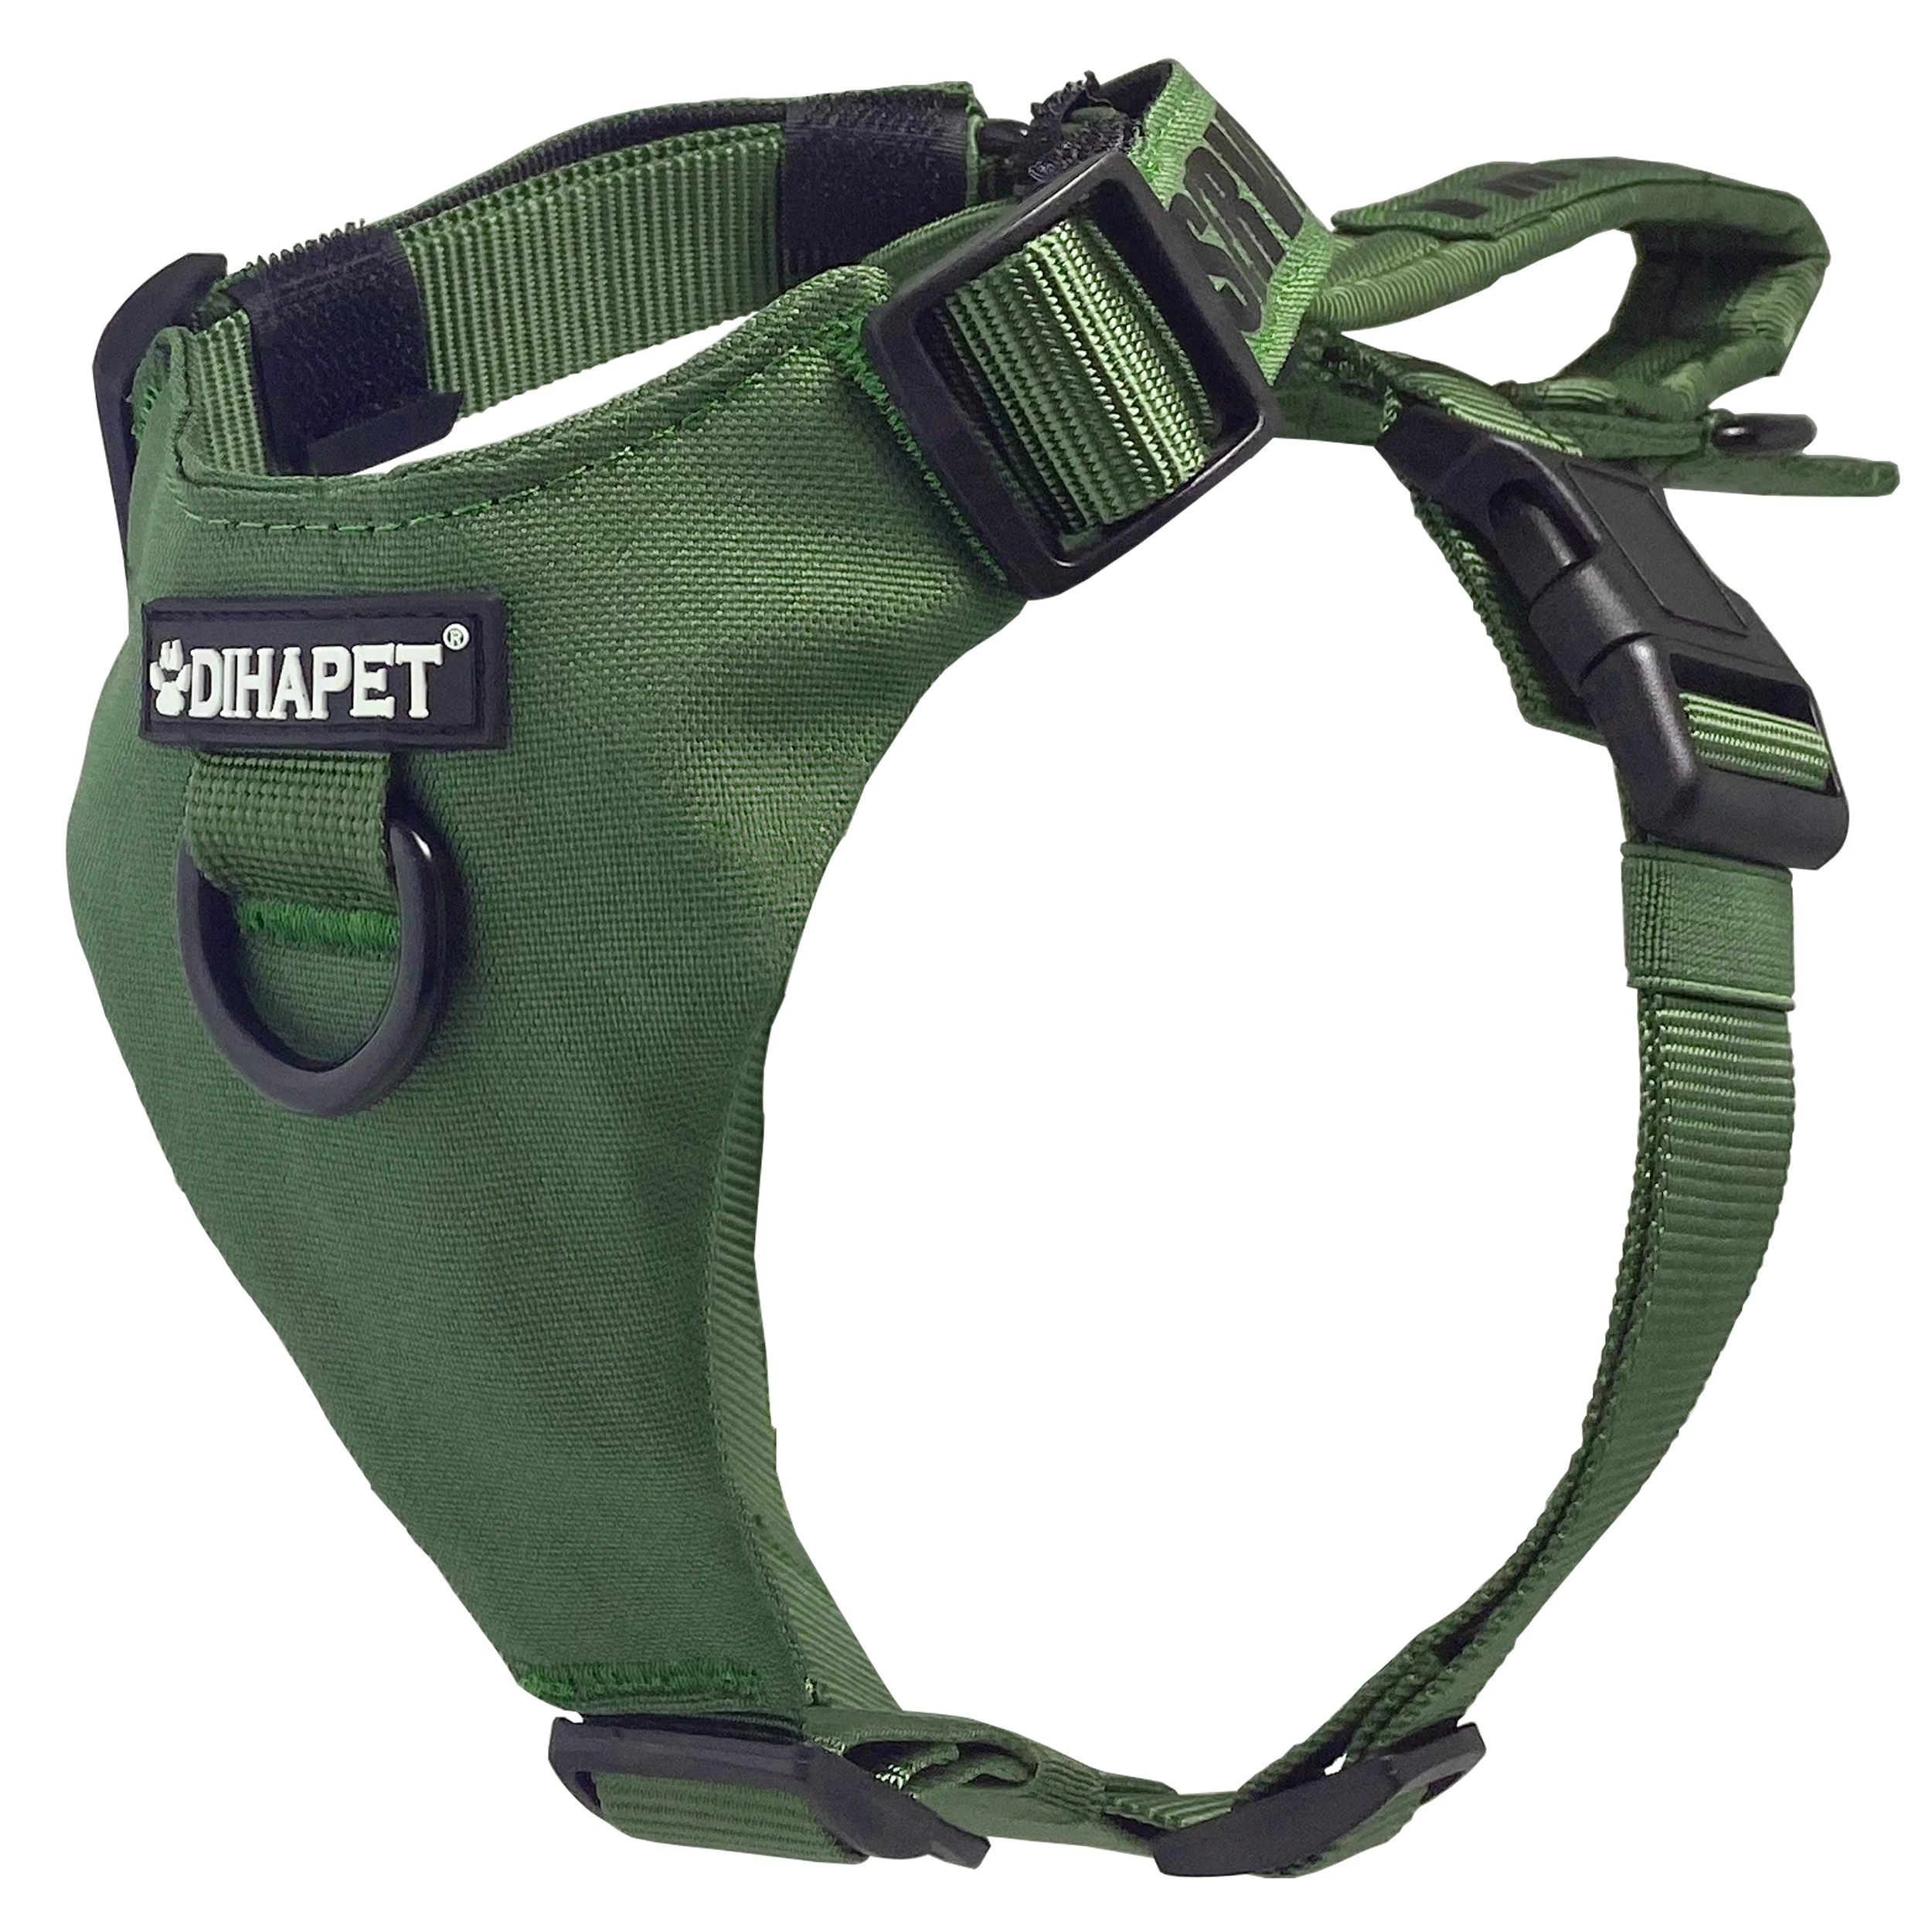 Dog Harness with Padded Handle,Nylon Oxford Mesh Soft Padding Lining, No-Pull Metal D Ring,Quick Release Buckle